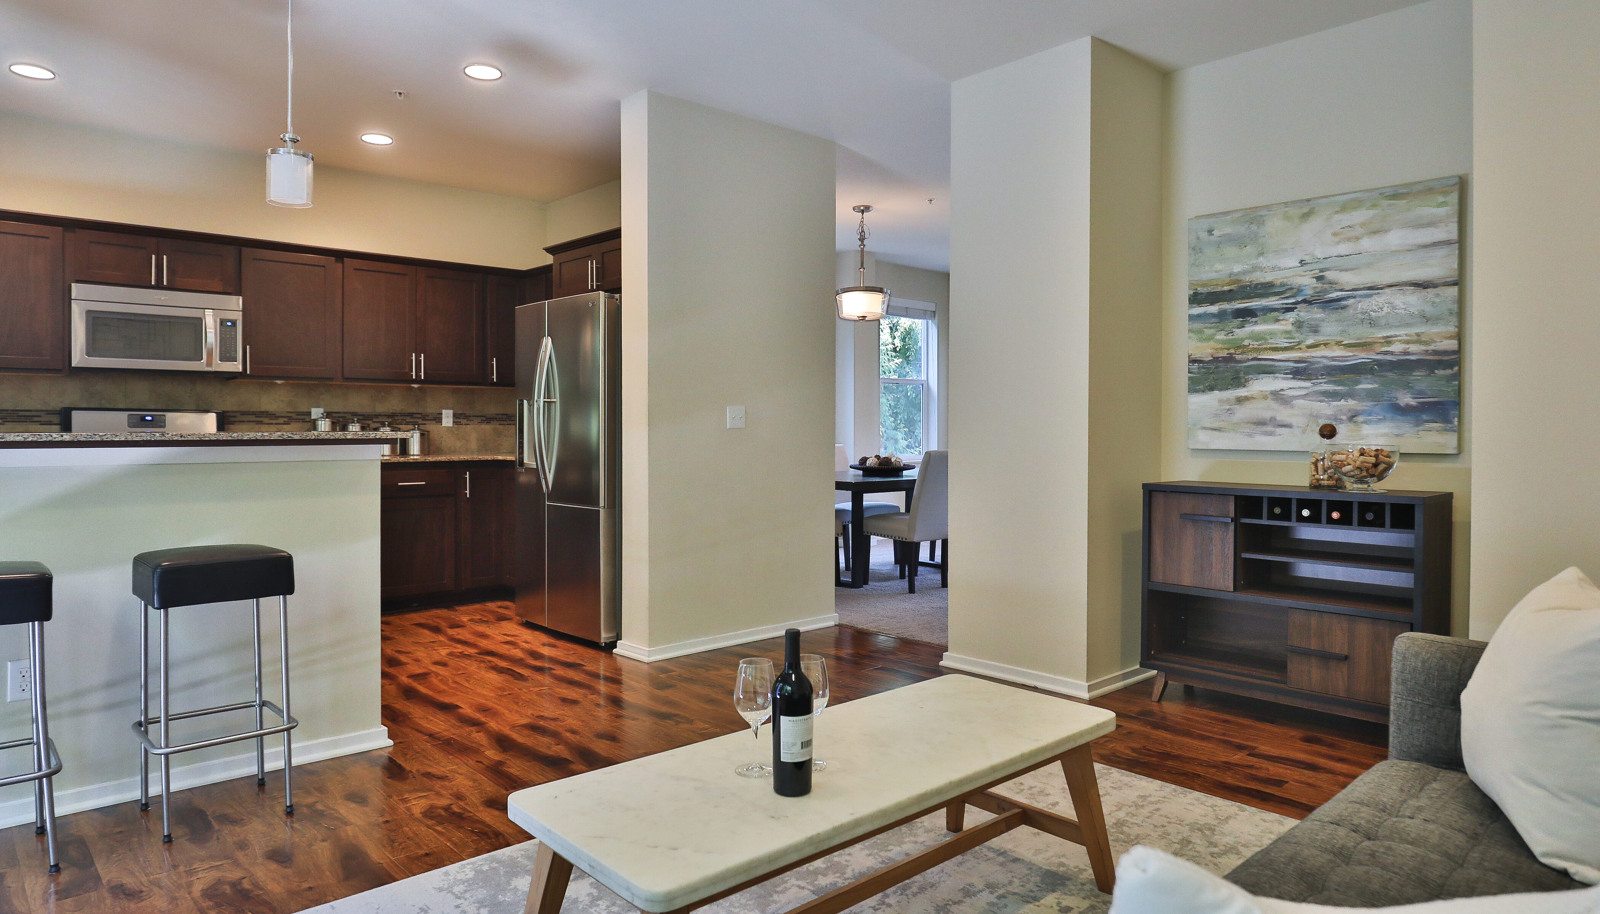 Family room and kitchen space can hold a crowd.